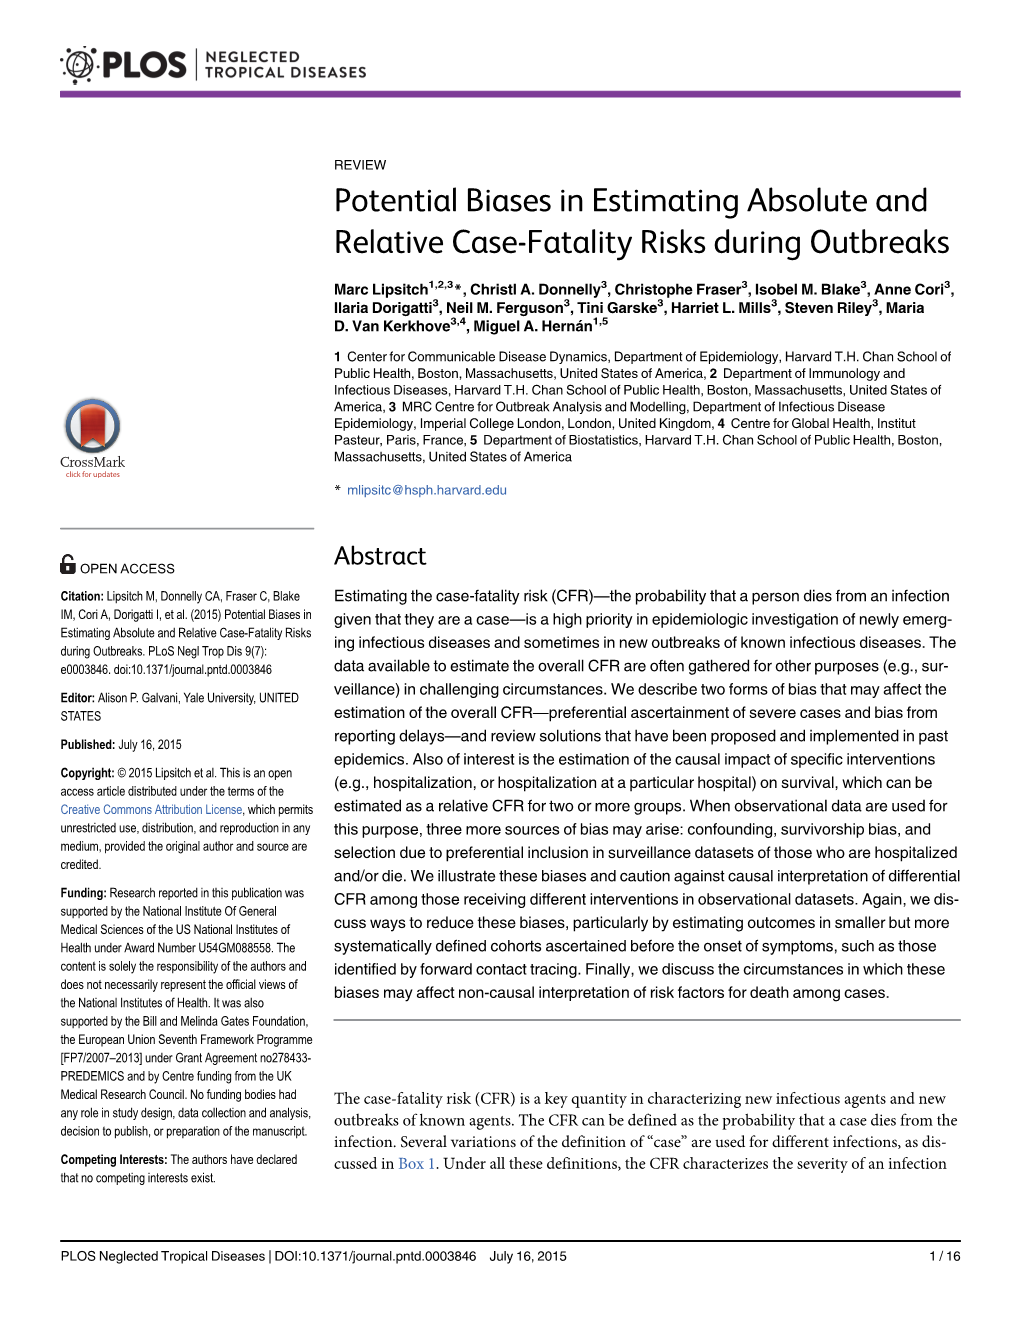 Potential Biases in Estimating Absolute and Relative Case-Fatality Risks During Outbreaks